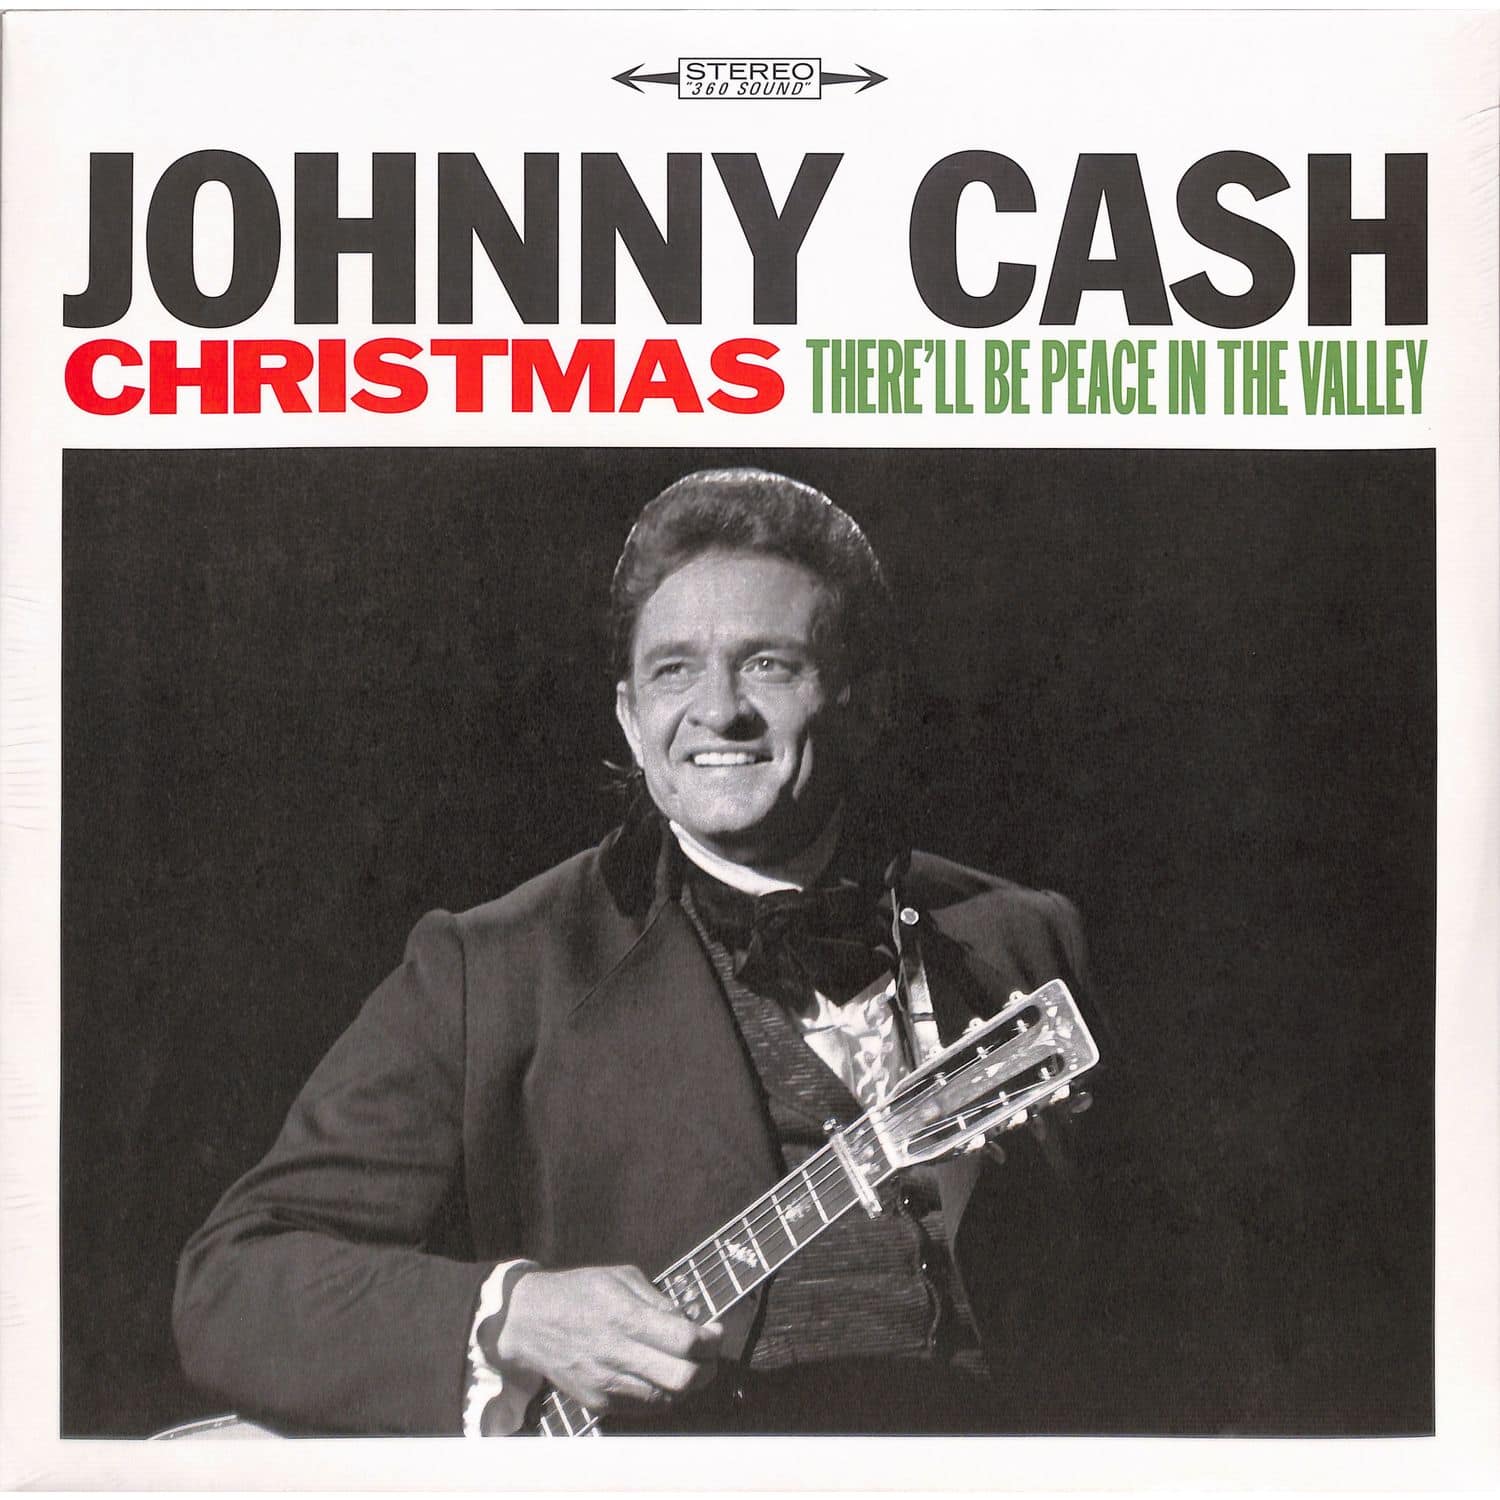 Johnny Cash - CHRISTMAS: THERE LL BE PEACE IN THE VALLEY 